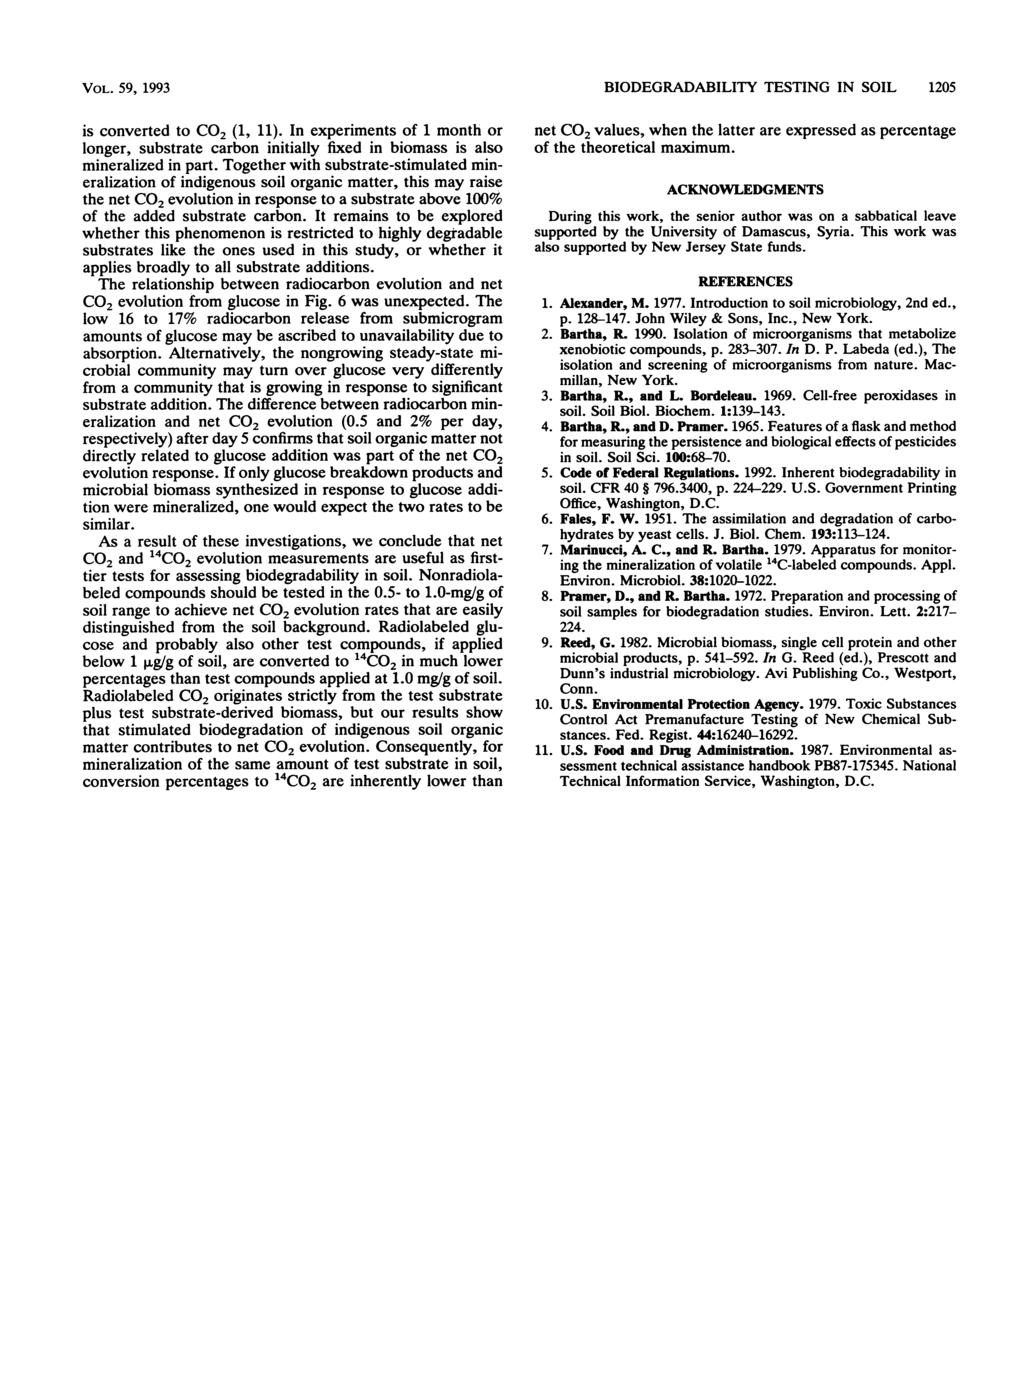 VOL. 59, 1993 is onverted to CO2 (1, 11). In experiments of 1 month or longer, substrate arbon initially fixed in biomass is also mineralized in part.